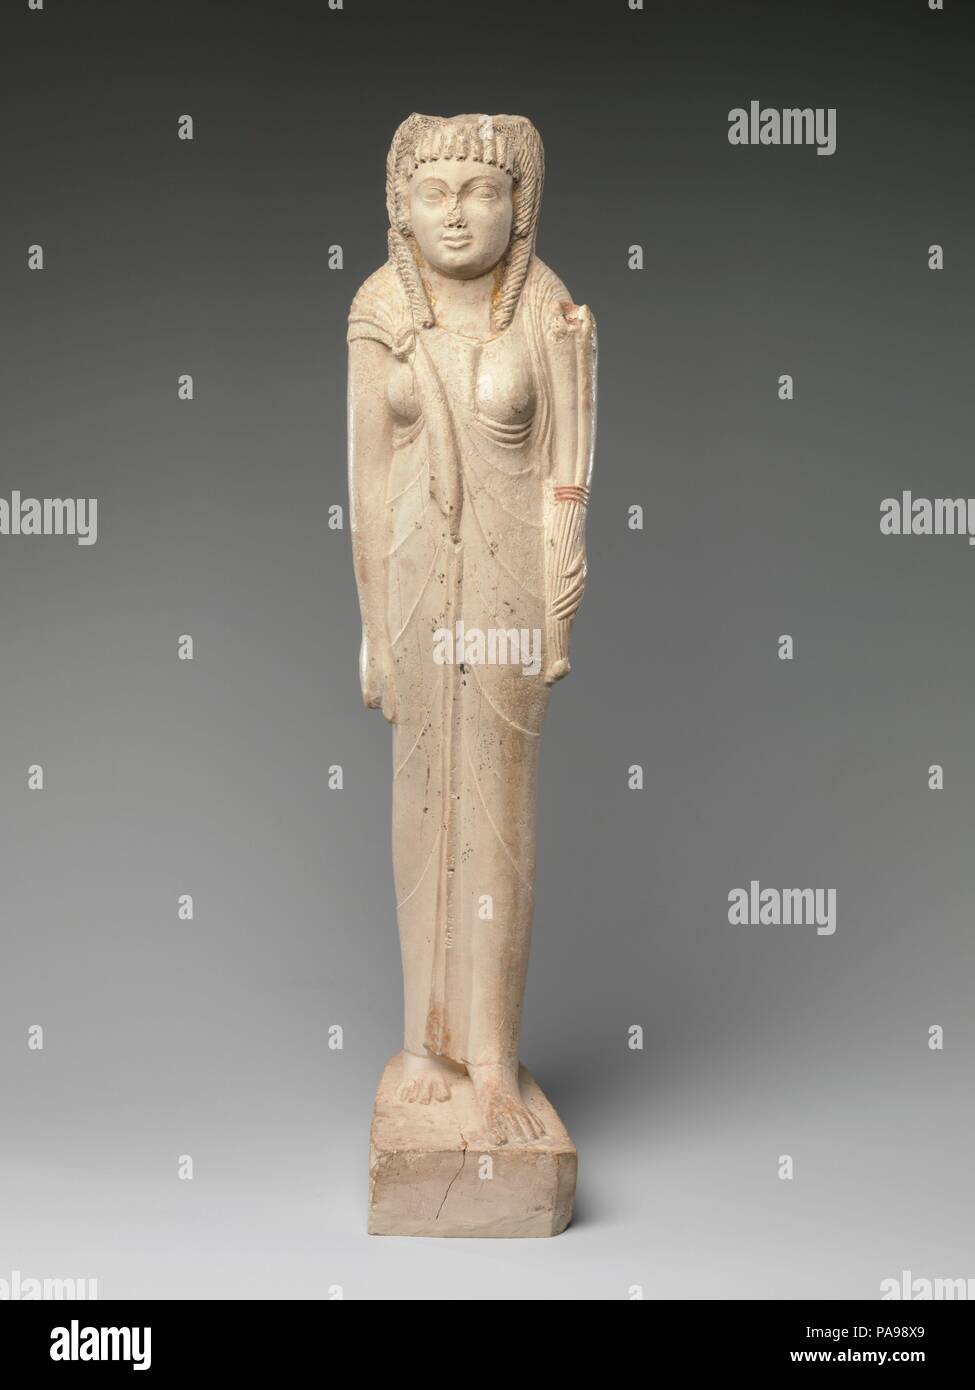 Statuette of Arsinoe II for her Posthumous Cult. Dimensions: H. 38.7 cm (15 1/4 in); W. 9.6 cm (3 3/4 in); D. 13.2 cm (5 3/16 in). Date: ca. 150-100 B.C..  The inscription on the back of this figure refers to Queen Arsinoe II as a goddess, indicating it was made after 270 B.C. when her cult was established at the time of her death in by her brother and husband, Ptolemy II. Gilding indicating divinity once covered her face, and traces still remain at the edges of her neckline.   While the overall frontal pose and disposition of the limbs in this small statue follows Egyptian traditions, the cor Stock Photo